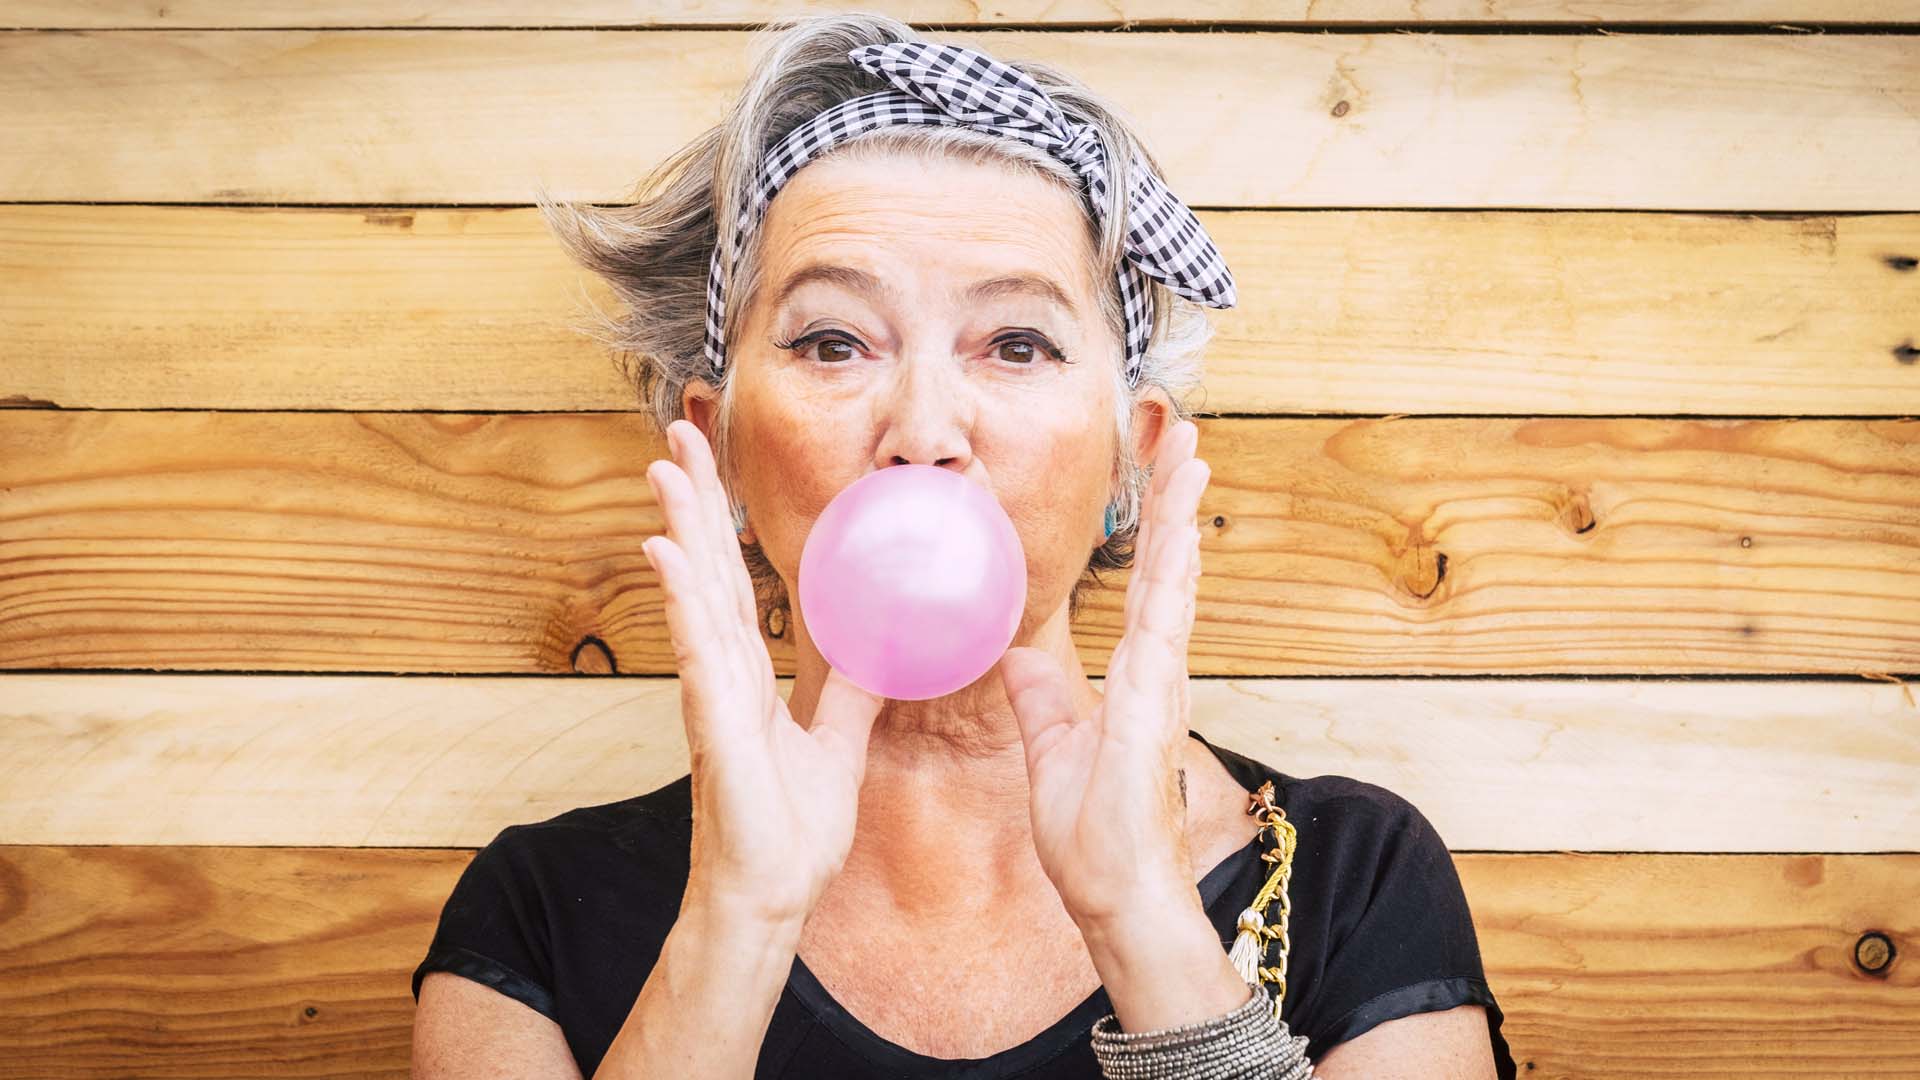 A woman blowing a bubble with pink bubblegum